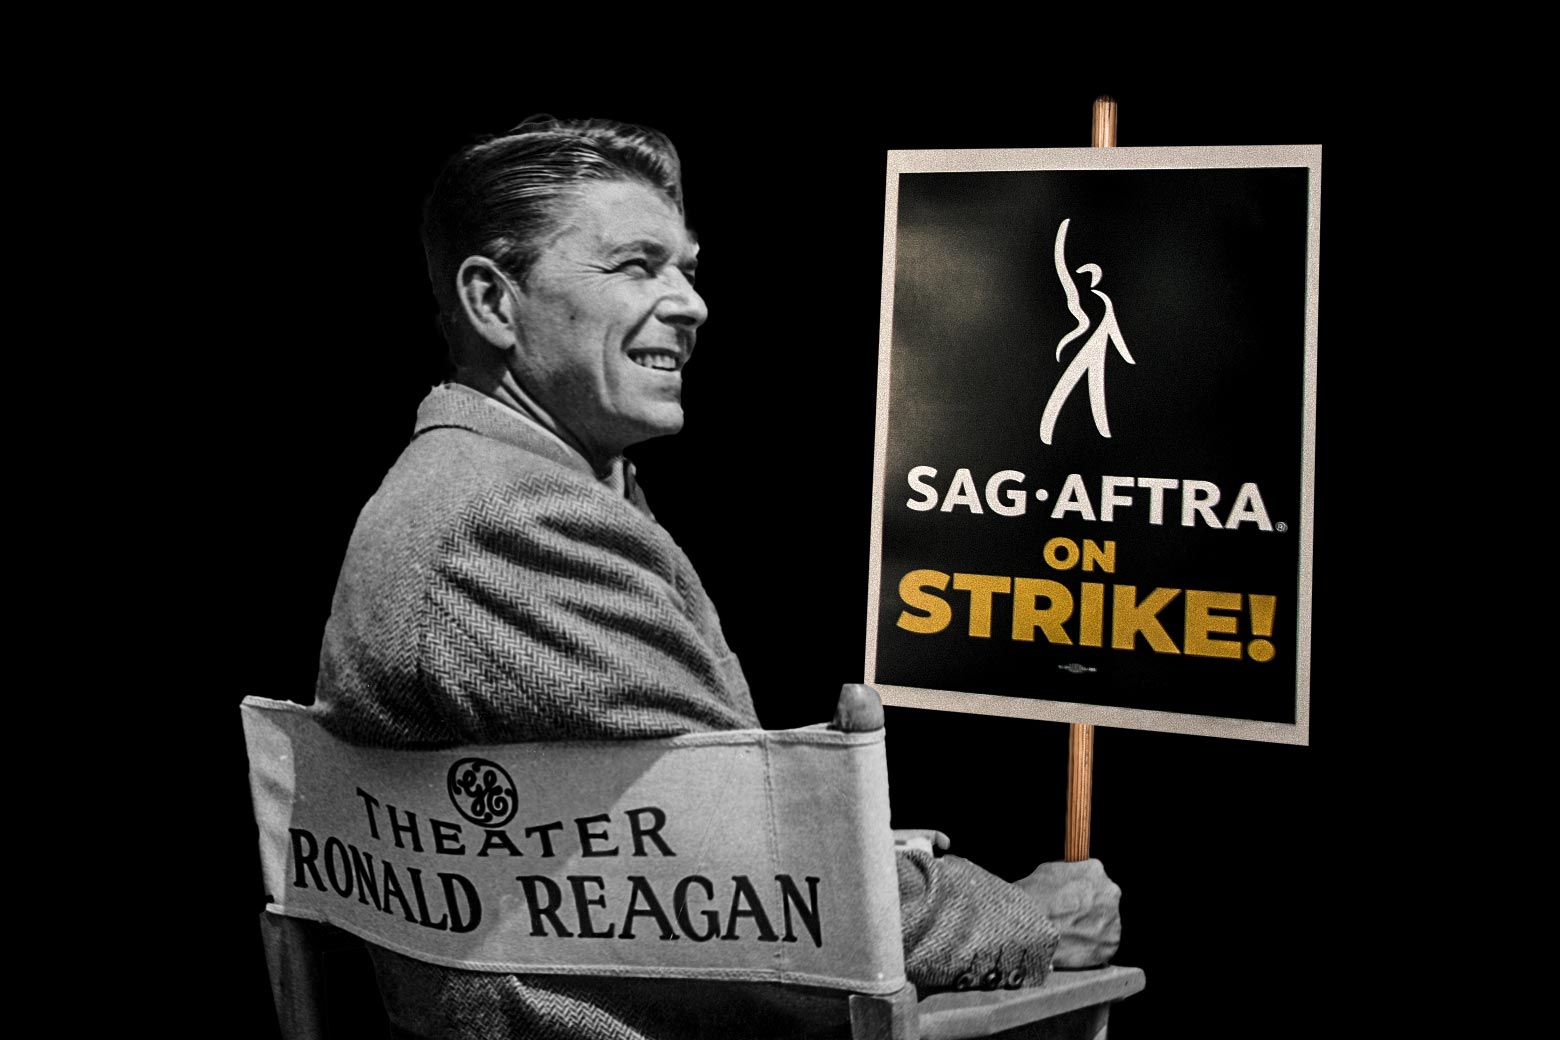 American actor Ronald Reagan (1911 - 2004) acts as on-air Program Supervisor and occasional player on the television series 'General Electric Theater', circa 1960. (Photo by Archive Photos/Getty Images) US actress Frances Fisher, SAG-AFTRA secretary-treasurer US actress Joely Fisher, SAG-AFTRA President US actress Fran Drescher, and National Executive Director and Chief Negotiator Duncan Crabtree-Ireland, joined by SAG-AFTRA members, pose for a photo during a press conference at the labor union's headquarters in Los Angeles, California, on July 13, 2023. Hollywood's actors announced Thursday they will go on strike, joining writers in the first industry-wide shutdown in 63 years after last-ditch talks failed, with nearly all film and television production set to grind to a halt. The Screen Actors Guild (SAG-AFTRA), which represents 160,000 performers including A-list stars, said negotiations had ended without a deal on their demands over dwindling pay and the threat posed by artificial intelligence. (Photo by Chris Delmas / AFP) (Photo by CHRIS DELMAS Chris Delmas/AFP via Getty Images)